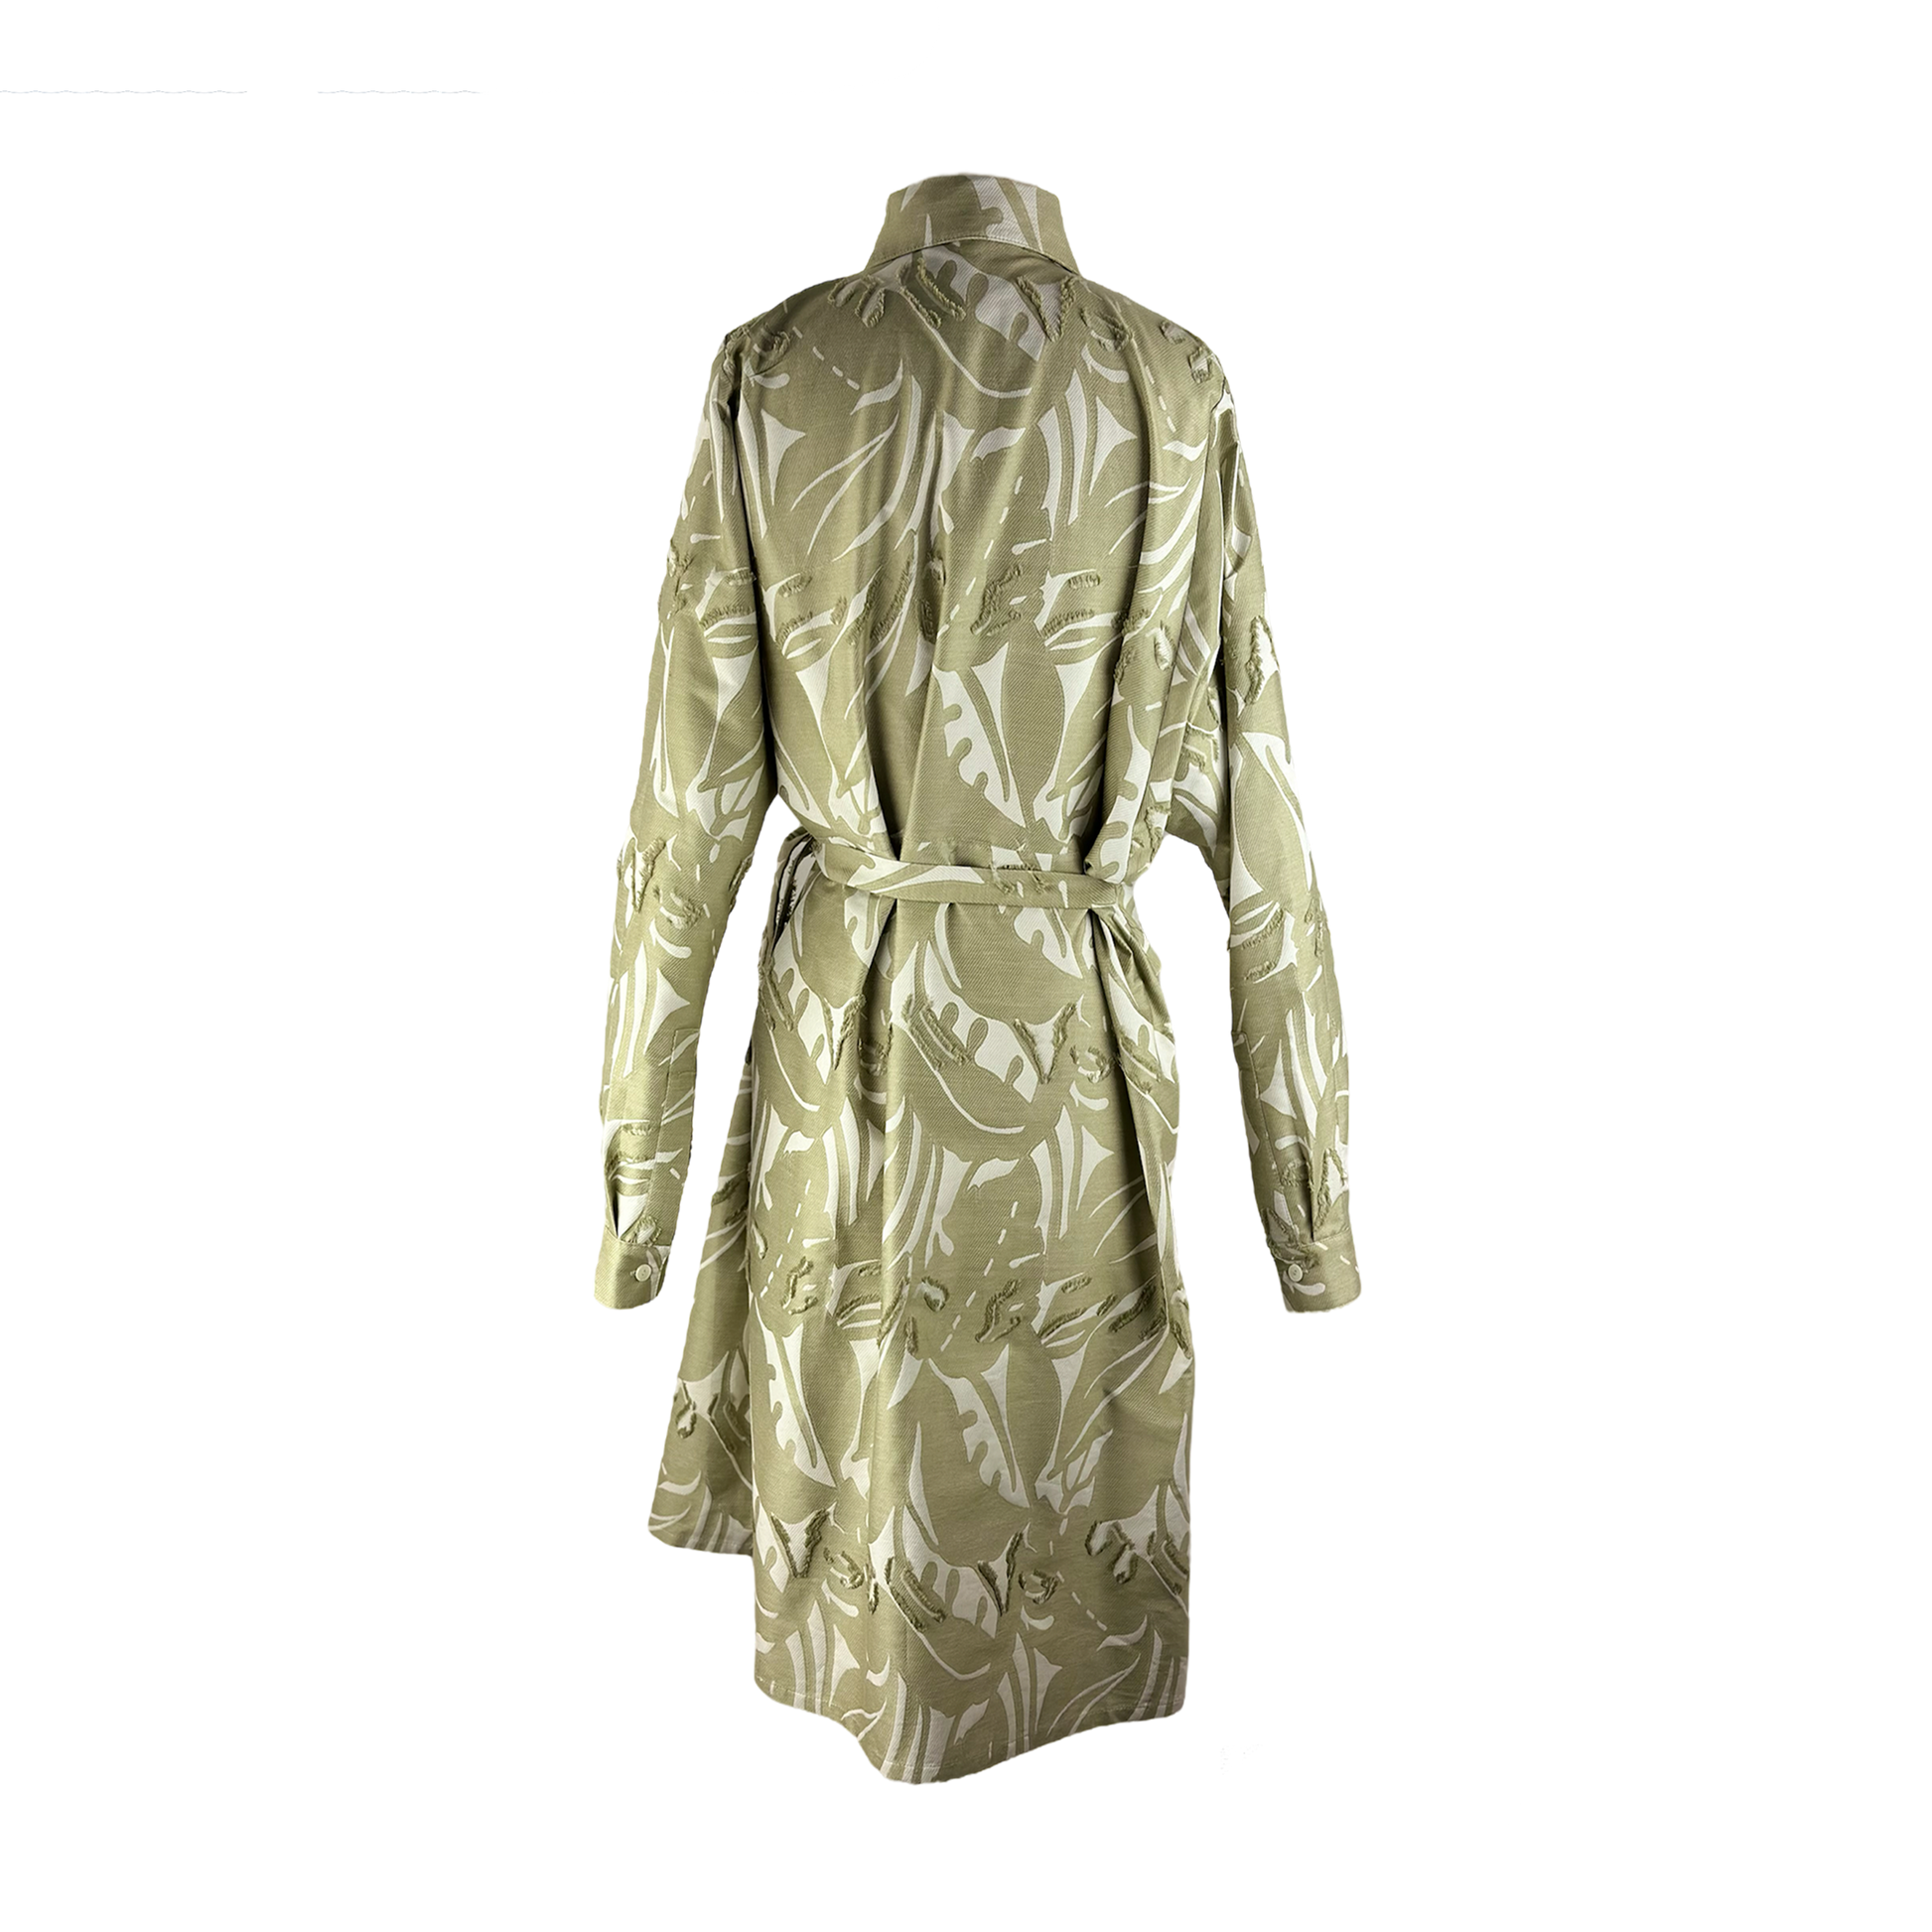 Back of Seige shirt dress with an eye-catching beige leaf print, with unusual drape detail in front and kimono-style sleeves